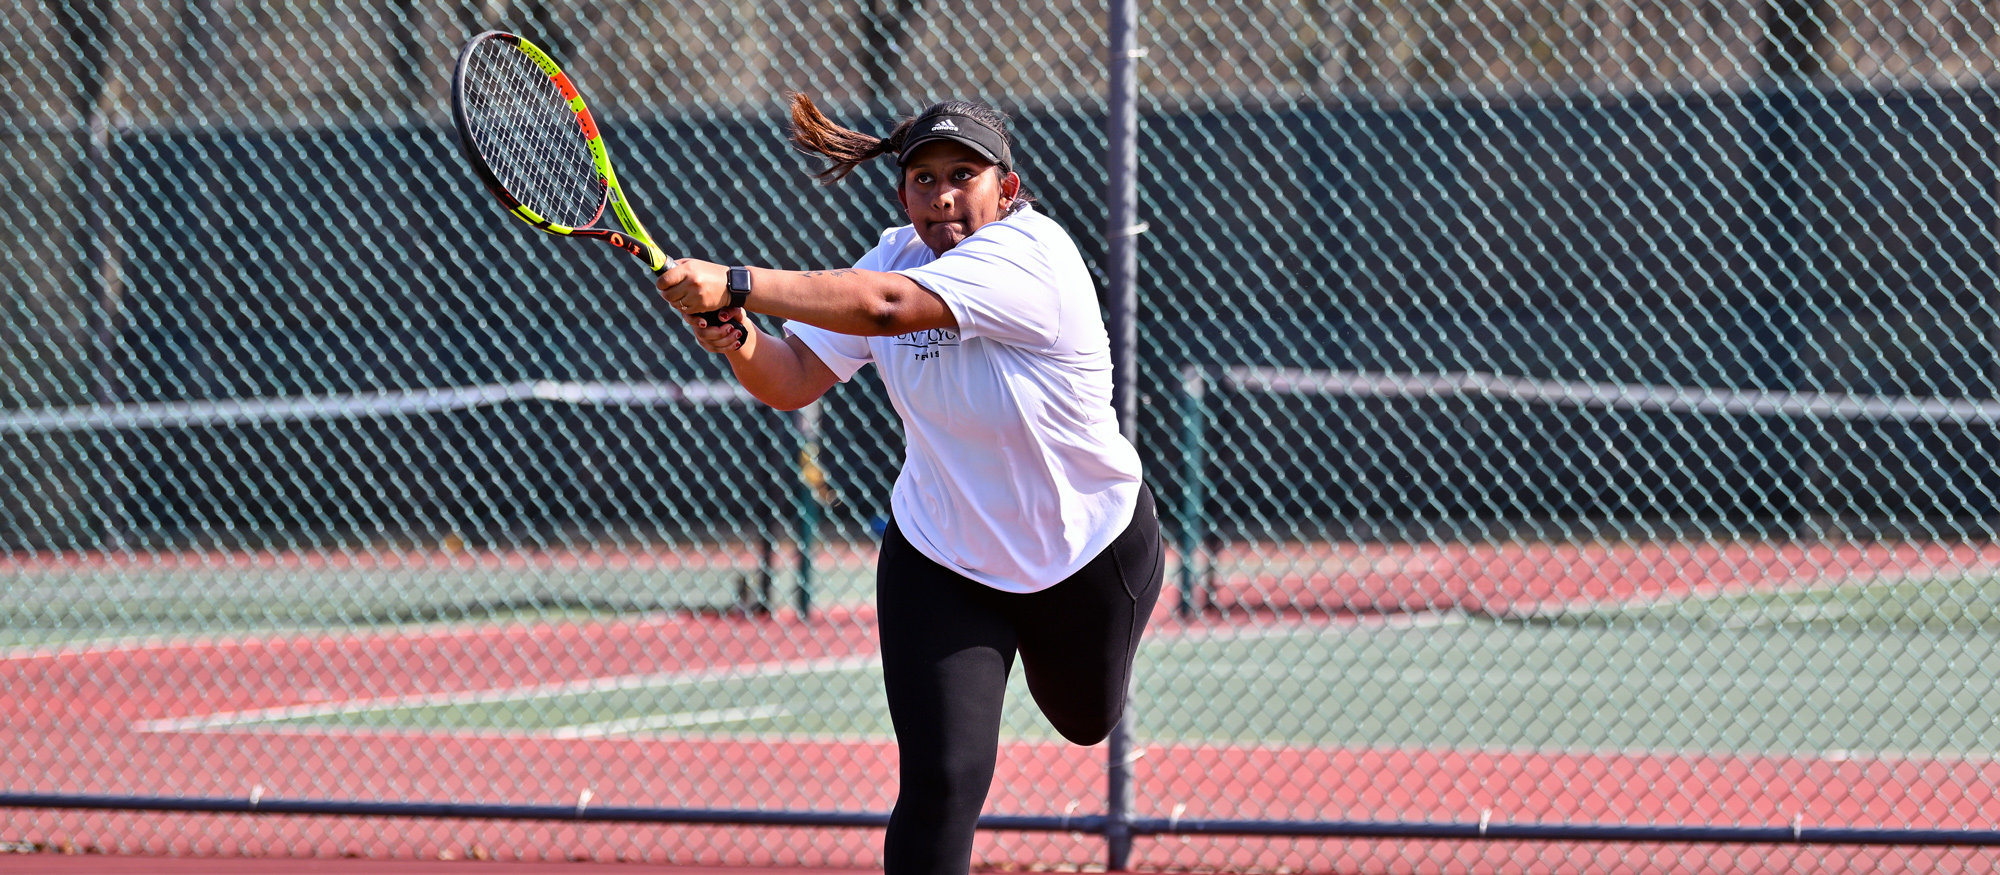 Shweta Kiran Cavale was 2-0 for the second straight match, with wins at second doubles and third singles in Mount Holyoke's 6-3 NEWMAC victory at Wheaton College on March 25, 2023. (RJB Sports file photo)